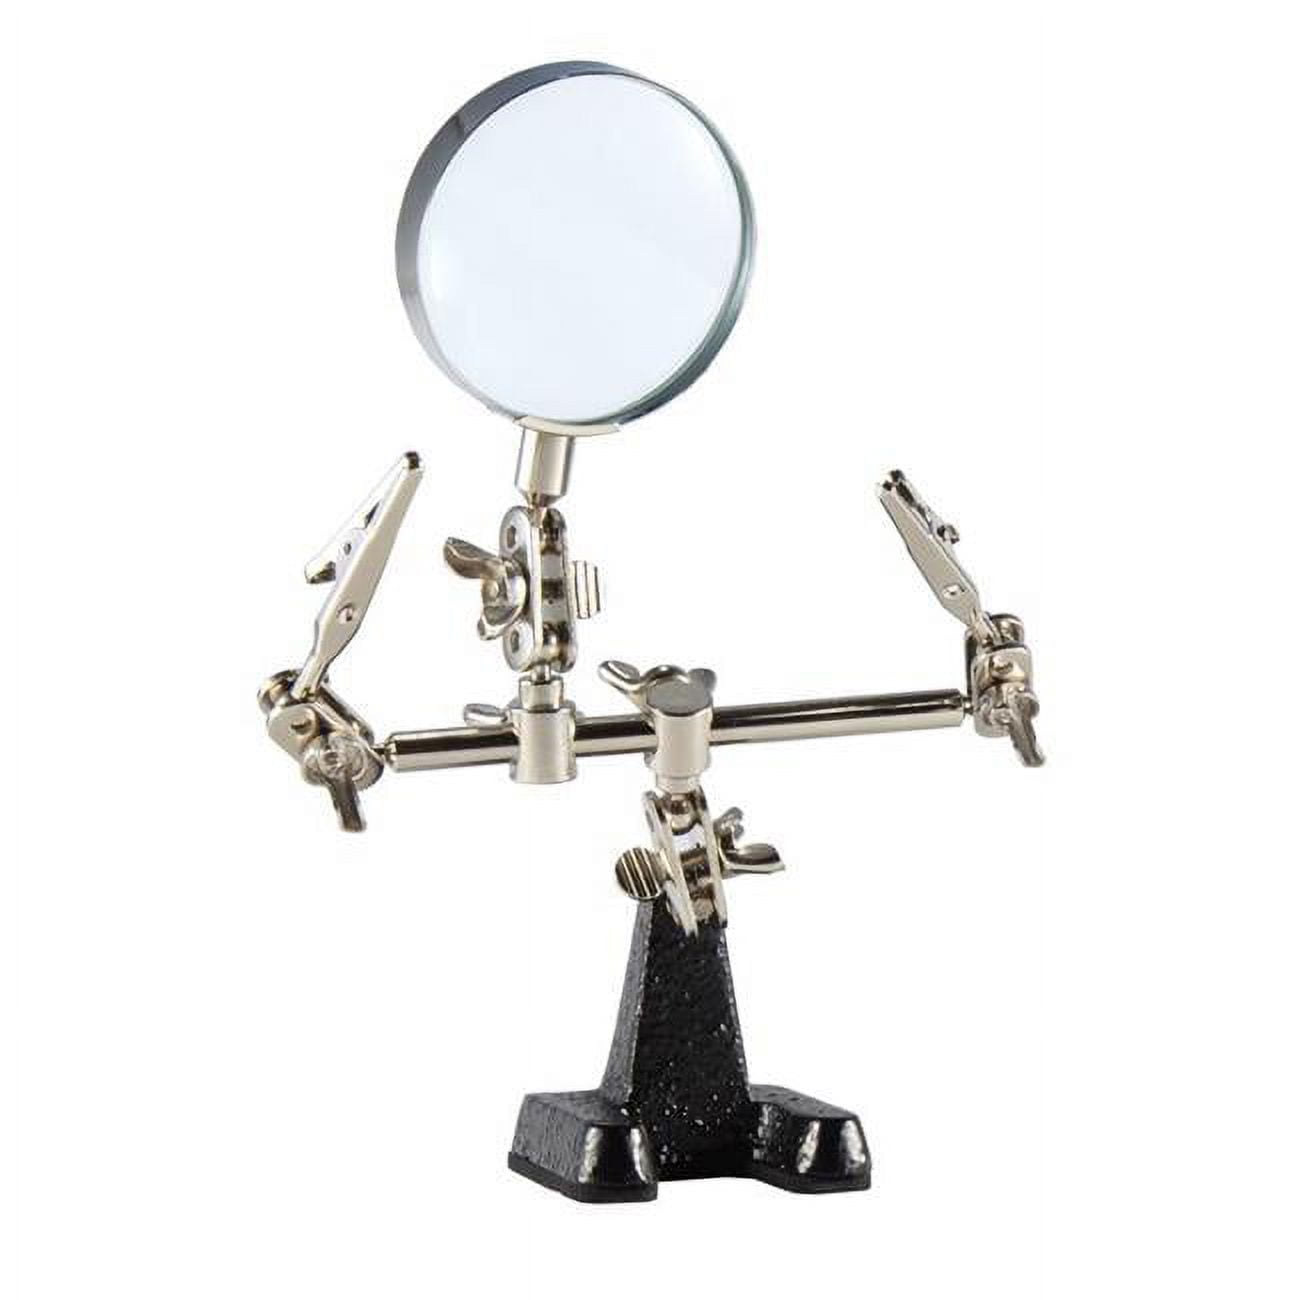 Picture of Weller 2004712 Magnifying Glass Soldering Project Holder with Magnifier